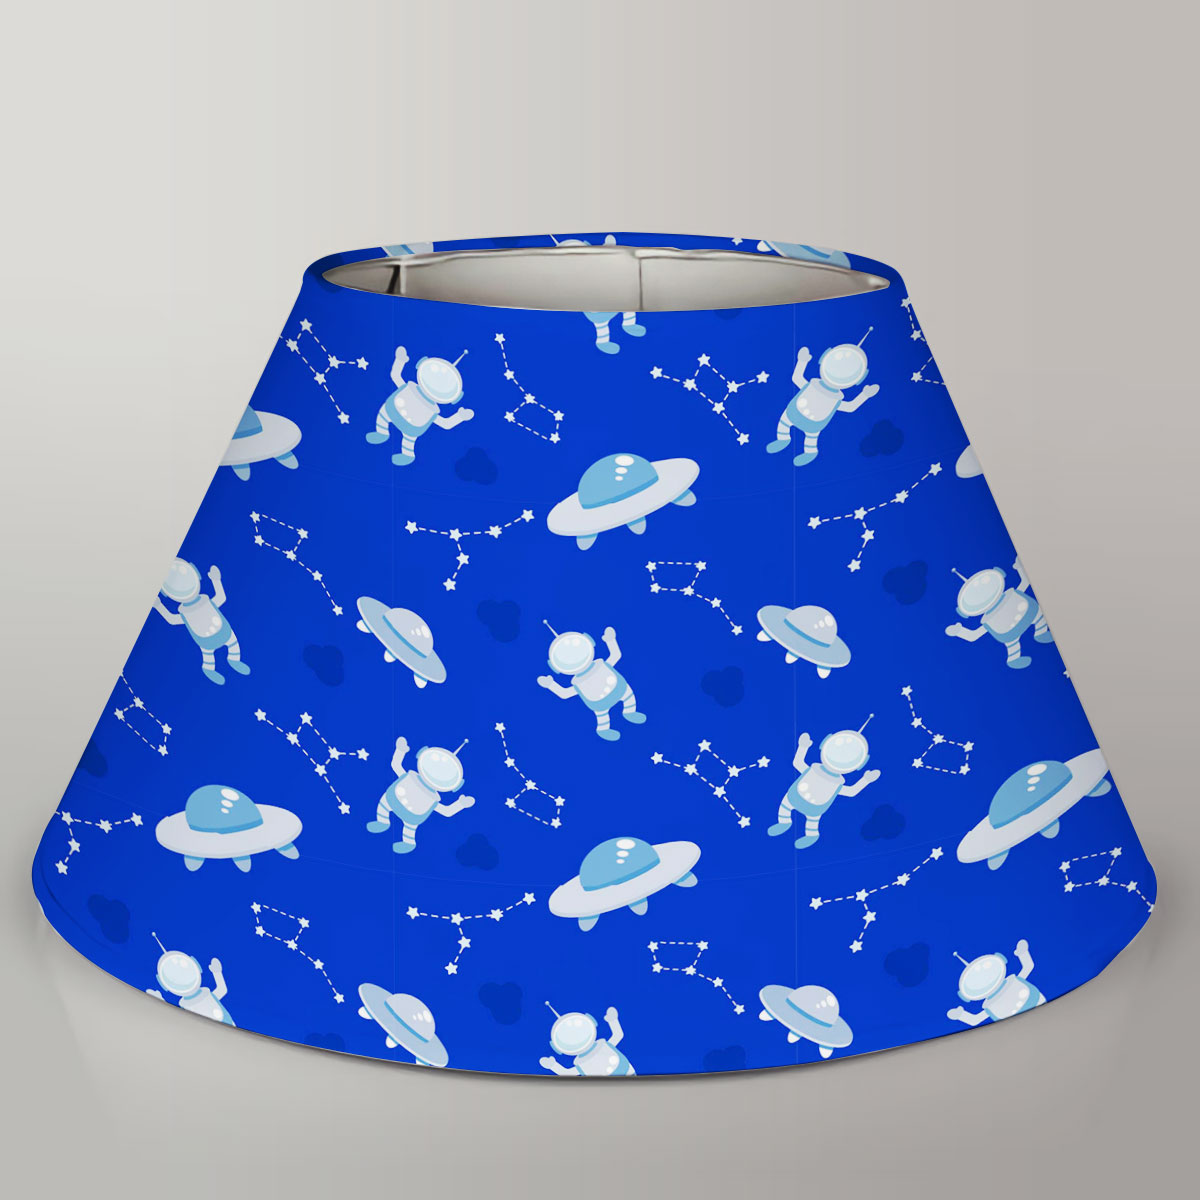 Astronauts Spaceships And Constellation Lamp Cover